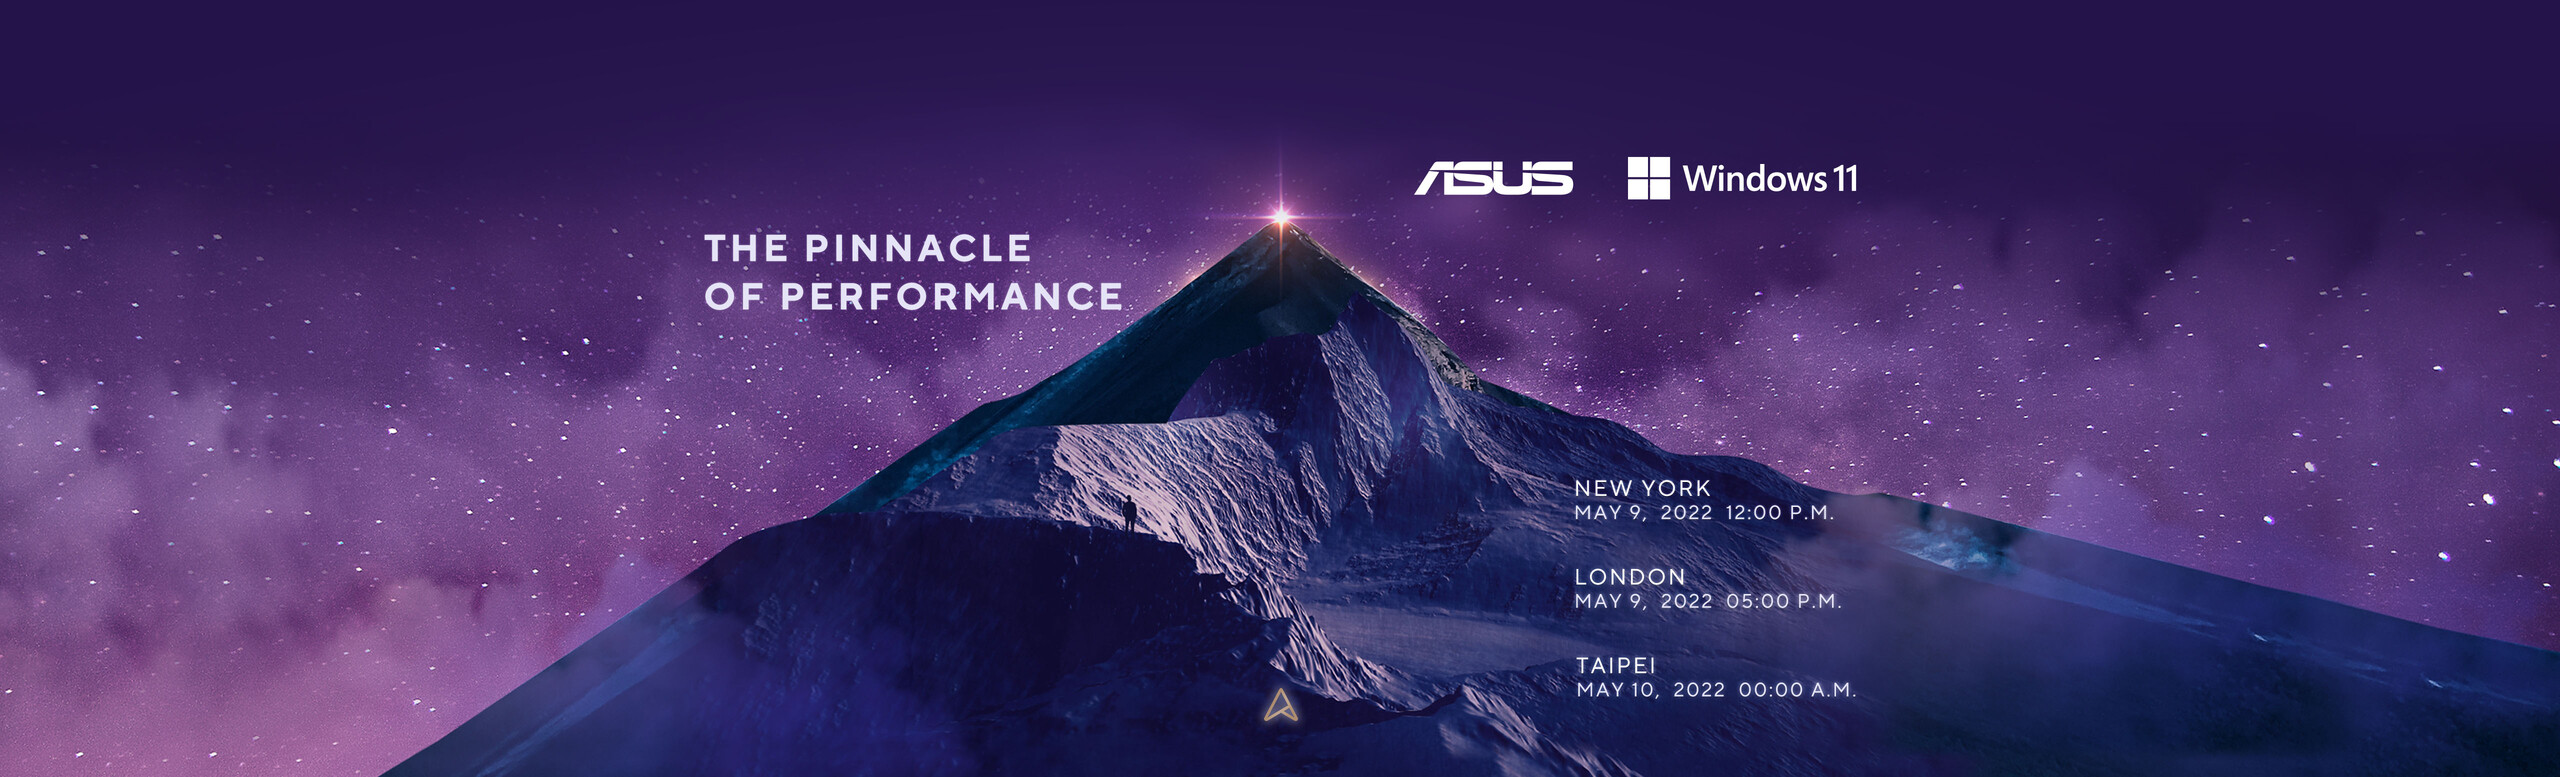 ASUS Events